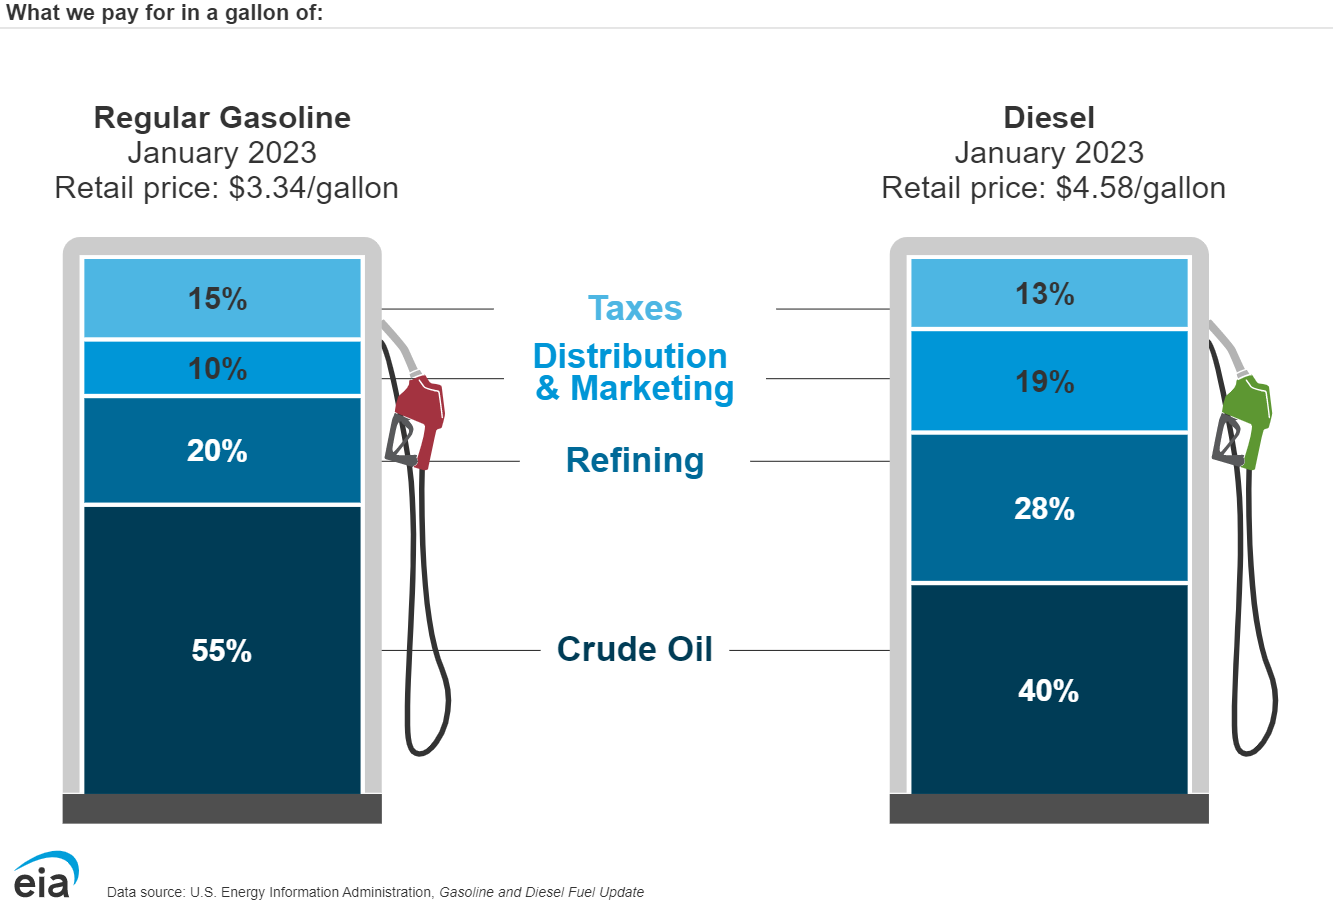 Image comparing costs of gas and diesel